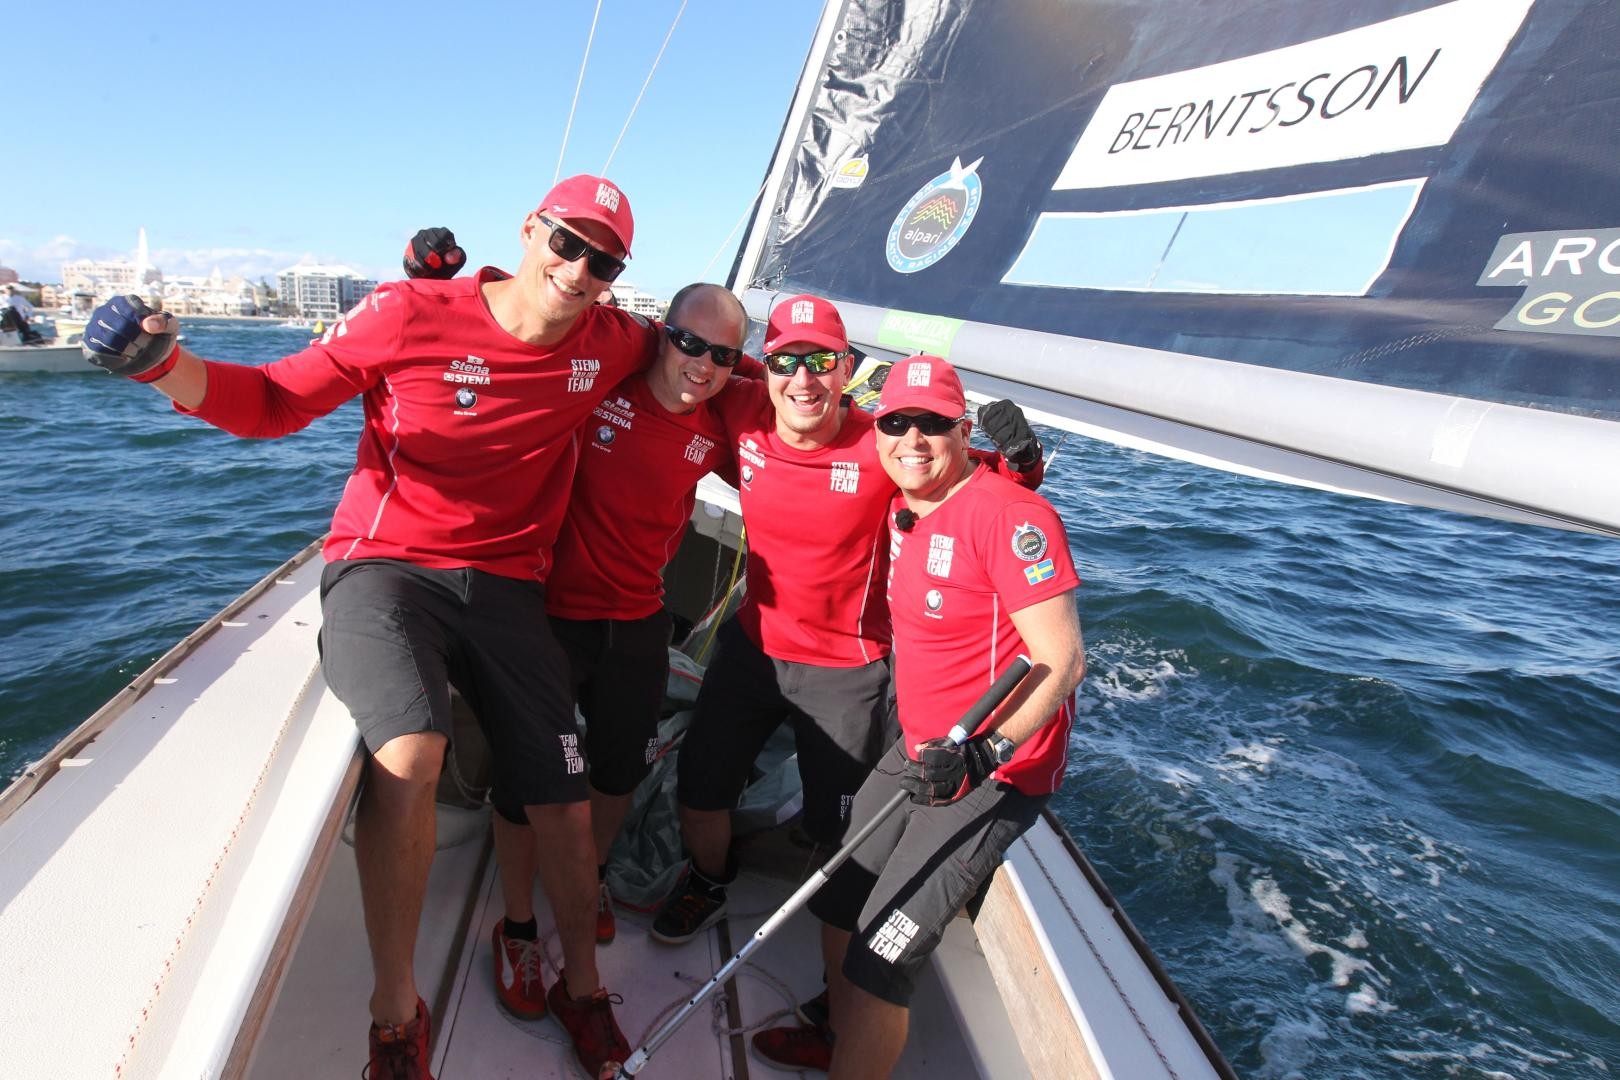 Johnie Berntsson (far right) and crew, two-time winners of the King Edward VII Gold Cup in 2008 and 2014